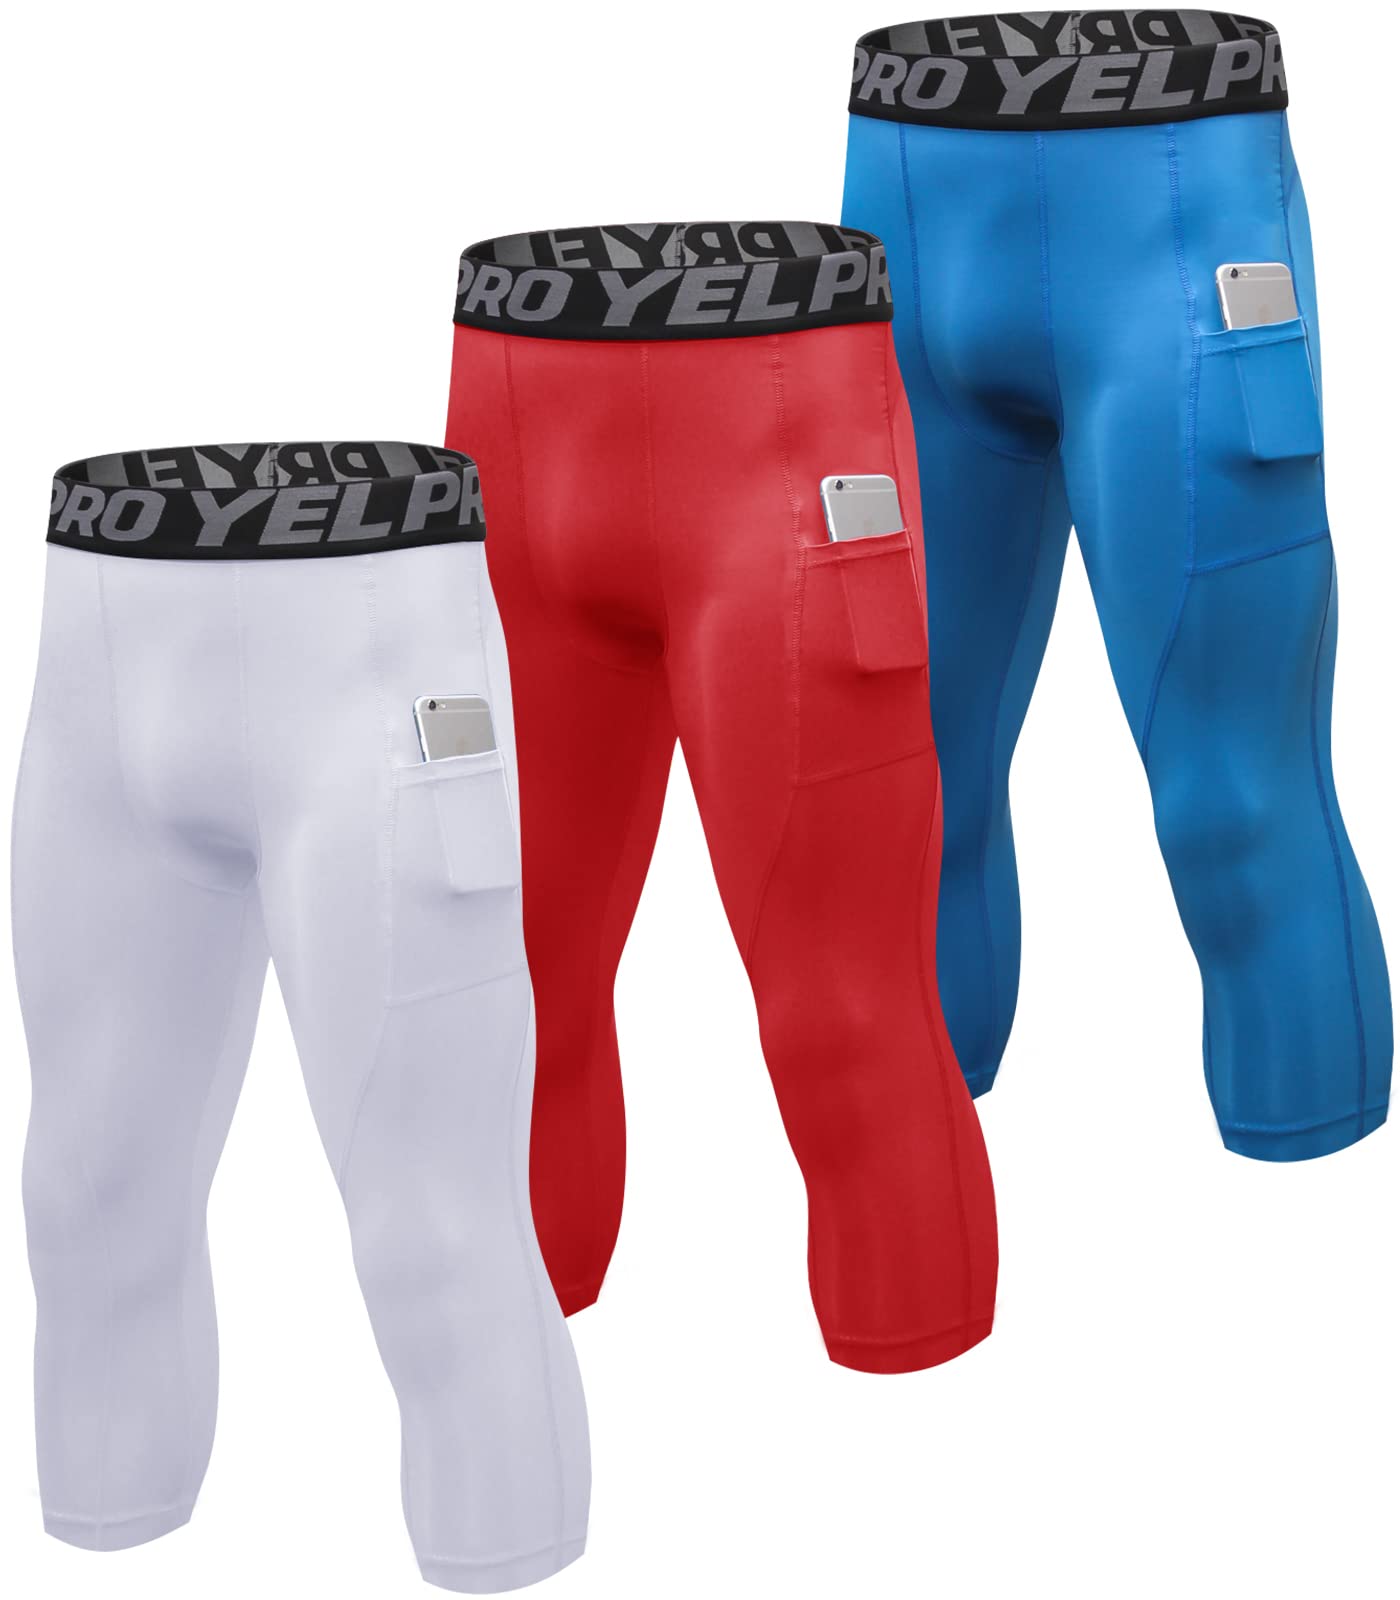 1 or 3 Pack Men's 3/4 Compression Pants Dry Fit Men Running Leggings 3/4  Tights Gym Capri Pant Football Basketball White+red+blue Large